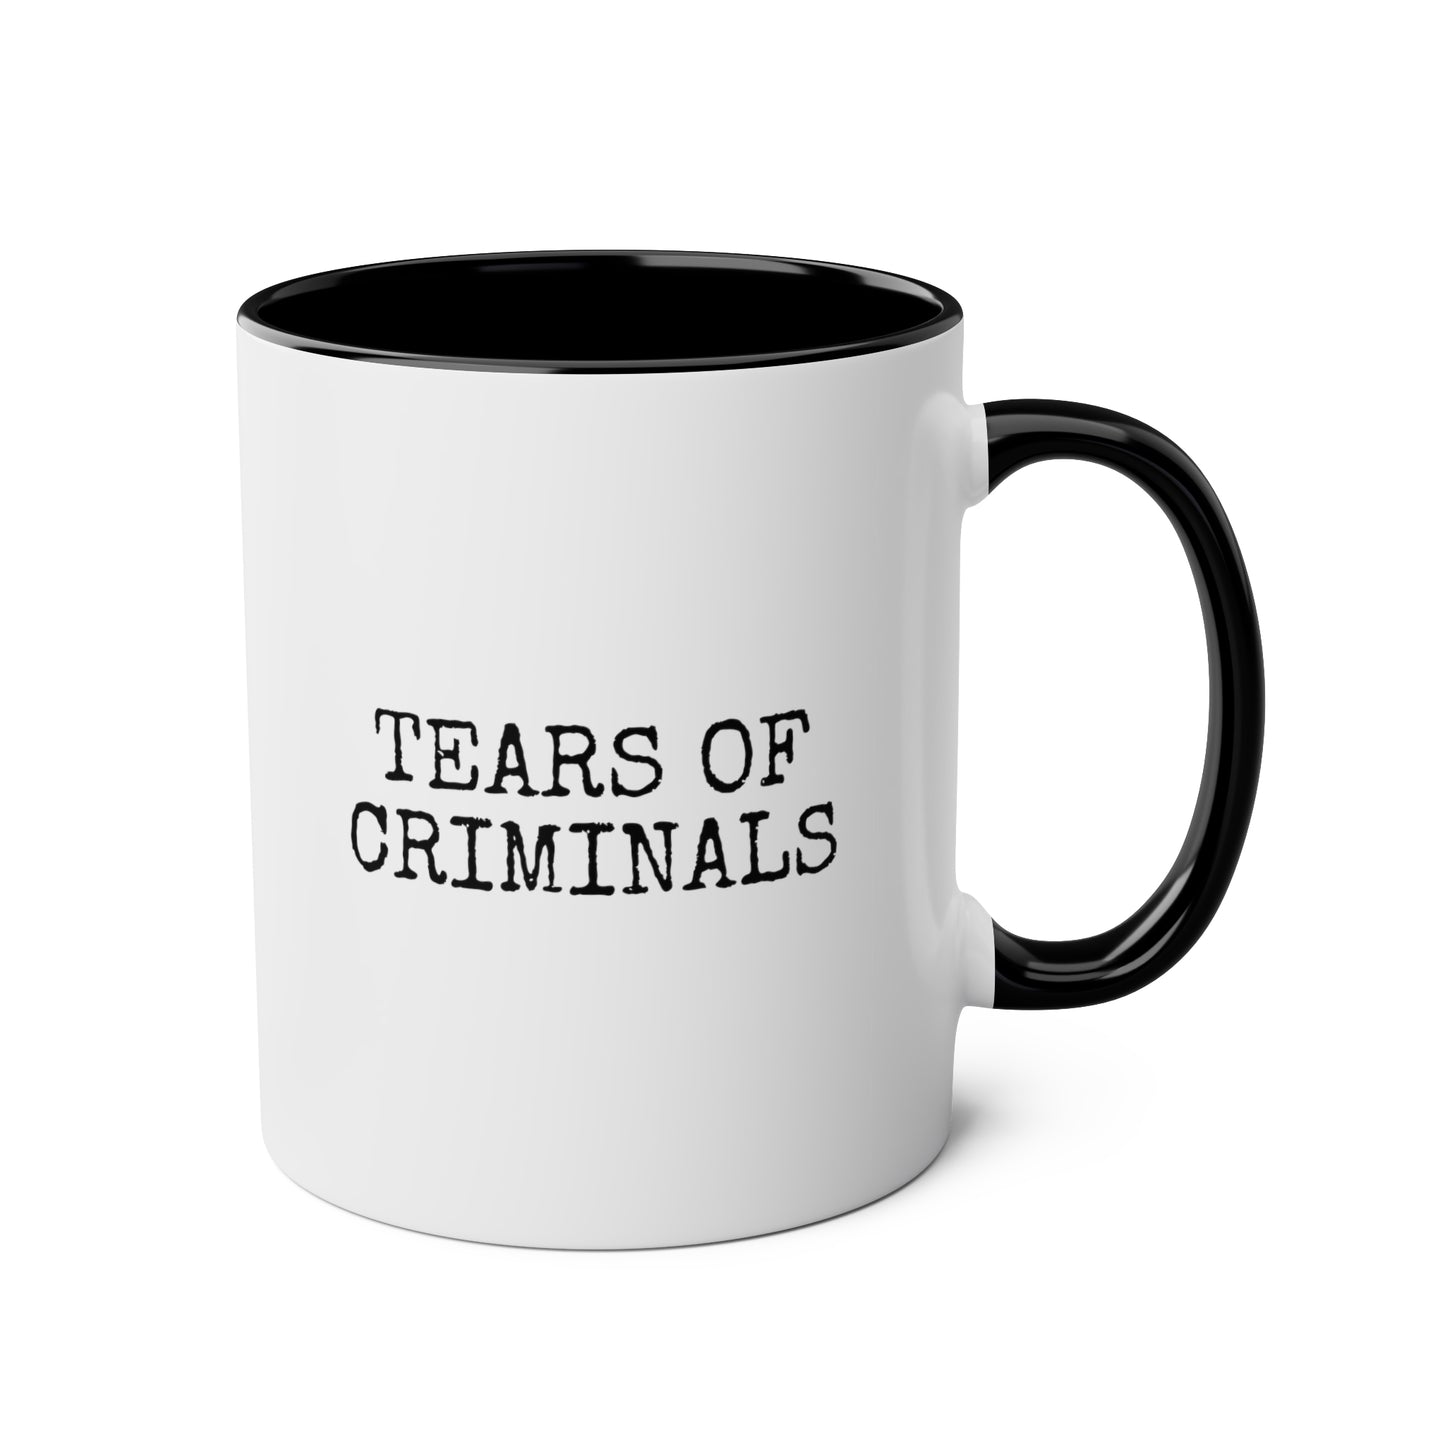 Tears of Criminals 11oz white with black accent funny large coffee mug gift for police officer cop graduation grad waveywares wavey wares wavywares wavy wares